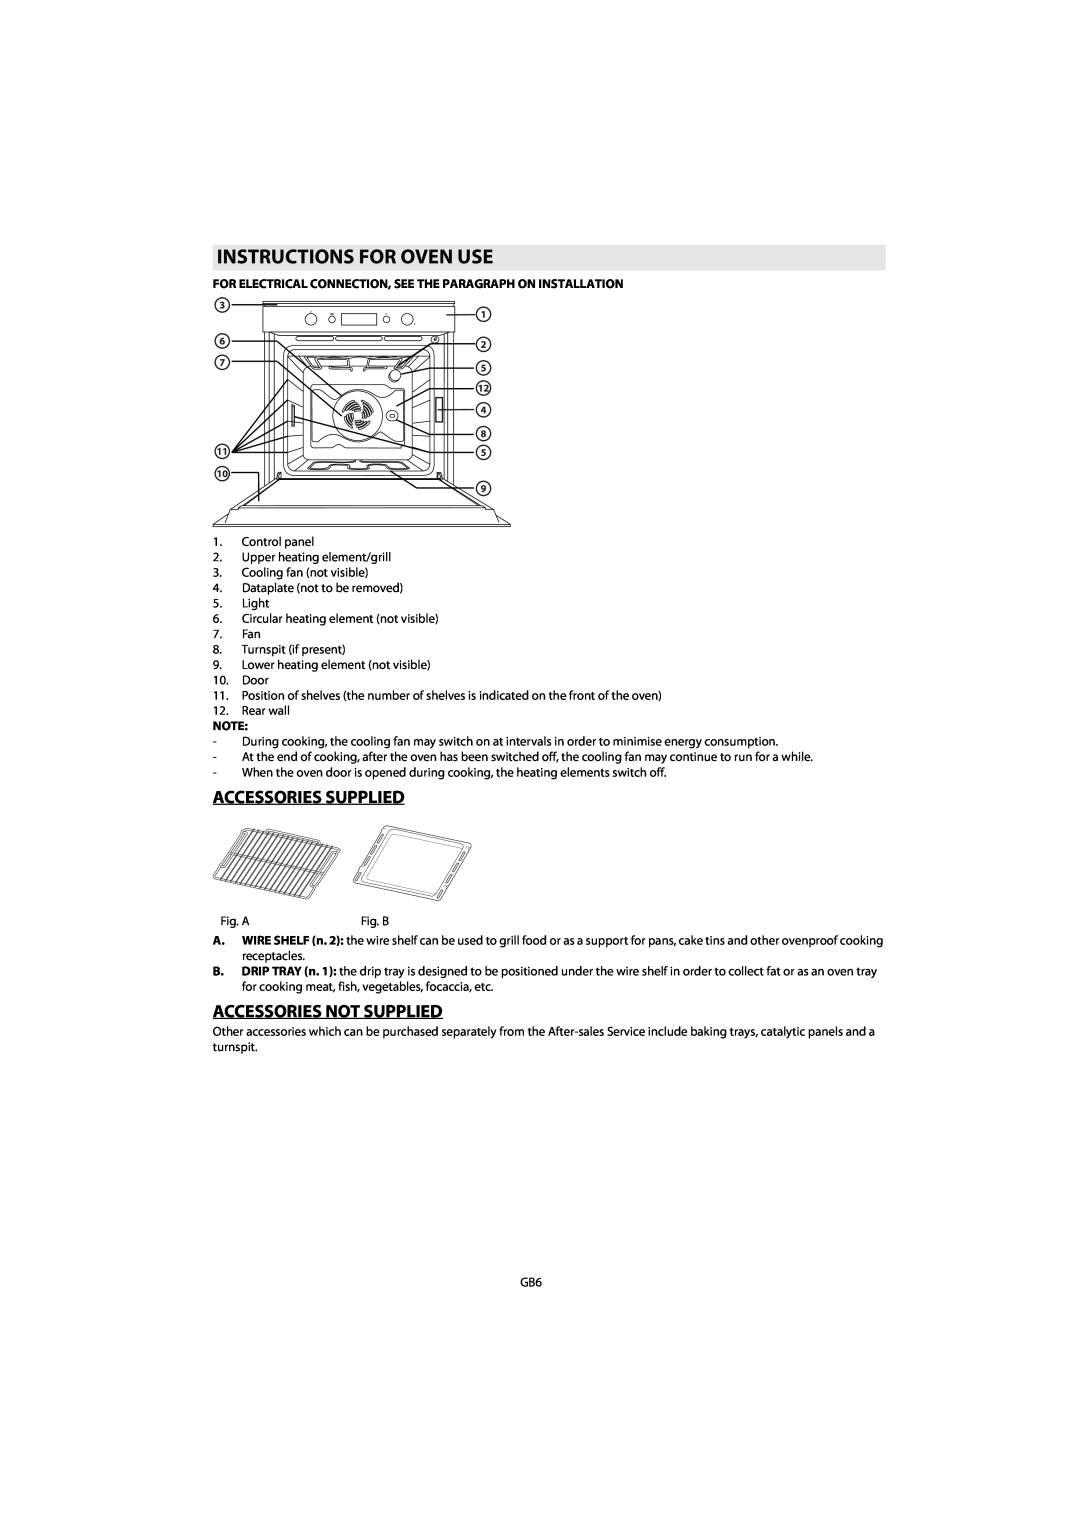 Whirlpool AKZM 755 manuel dutilisation Instructions For Oven Use, Accessories Supplied, Accessories Not Supplied 